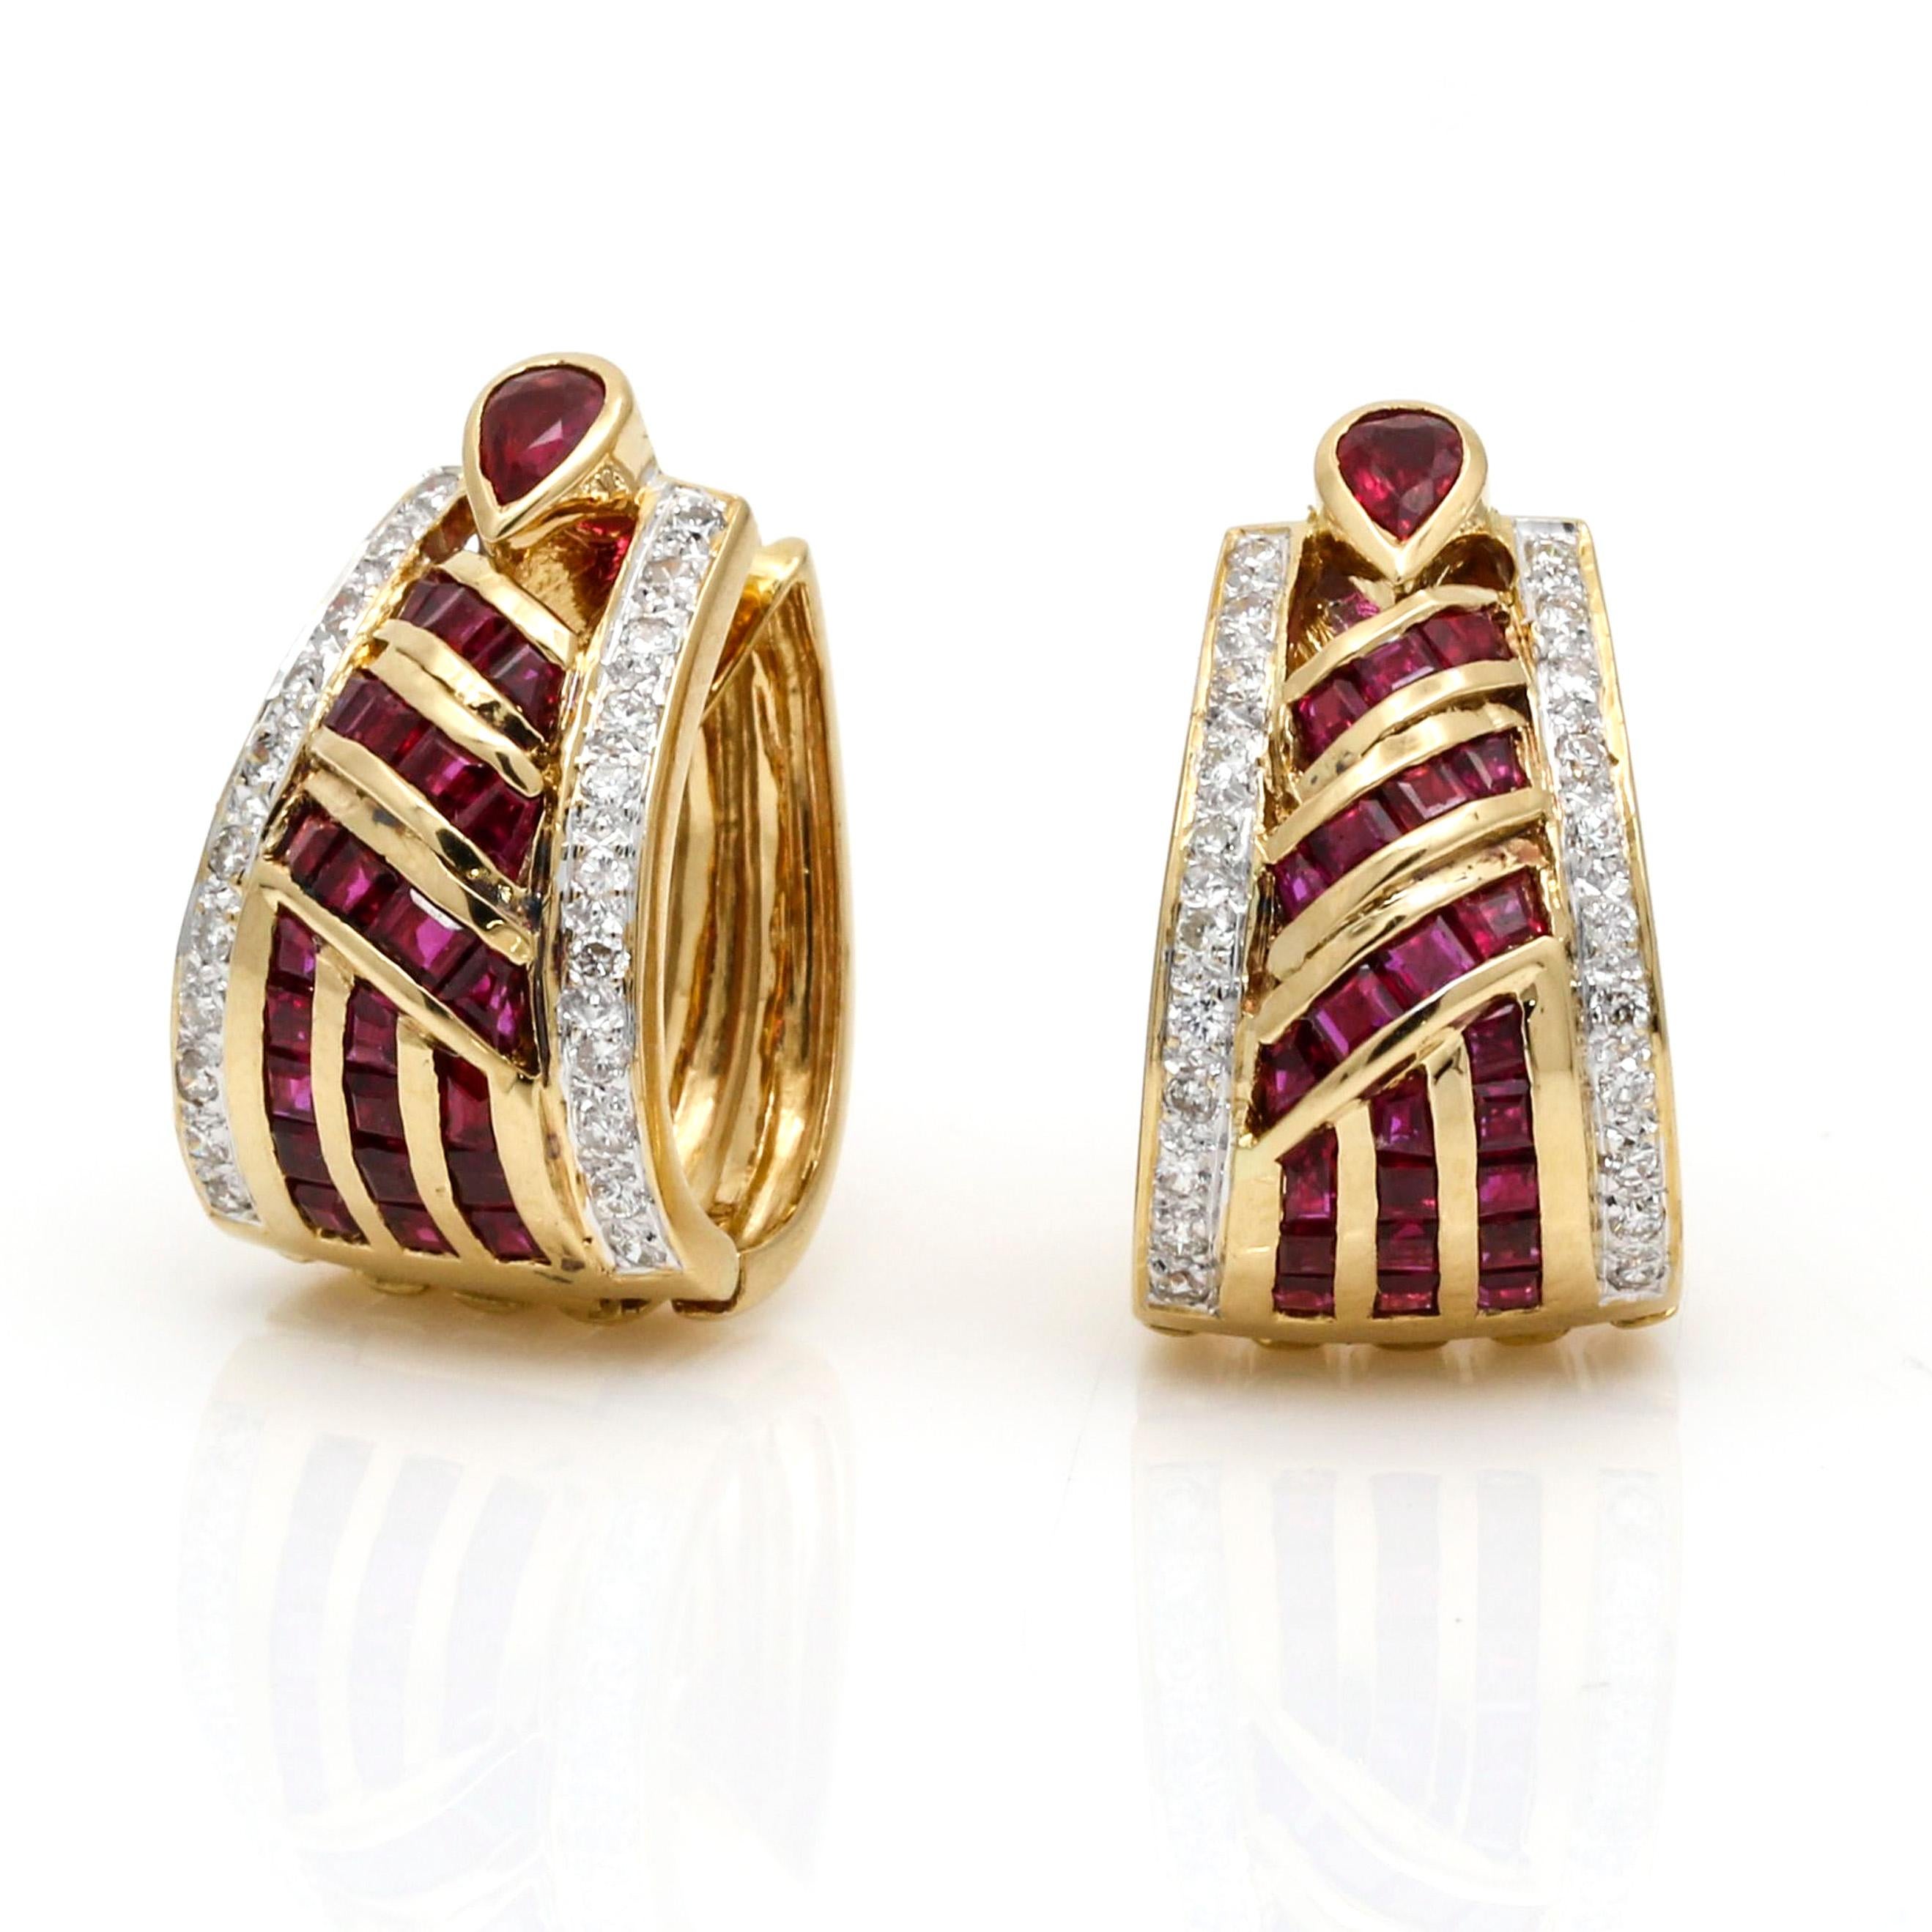 Highlight your timeless beauty with this stunning pair of ruby and diamond earrings. These oval-shaped hinged hoop earrings crafted from 18k yellow gold feature Thailandese rubies with a beautiful red hue, near colorless diamonds, and a polished